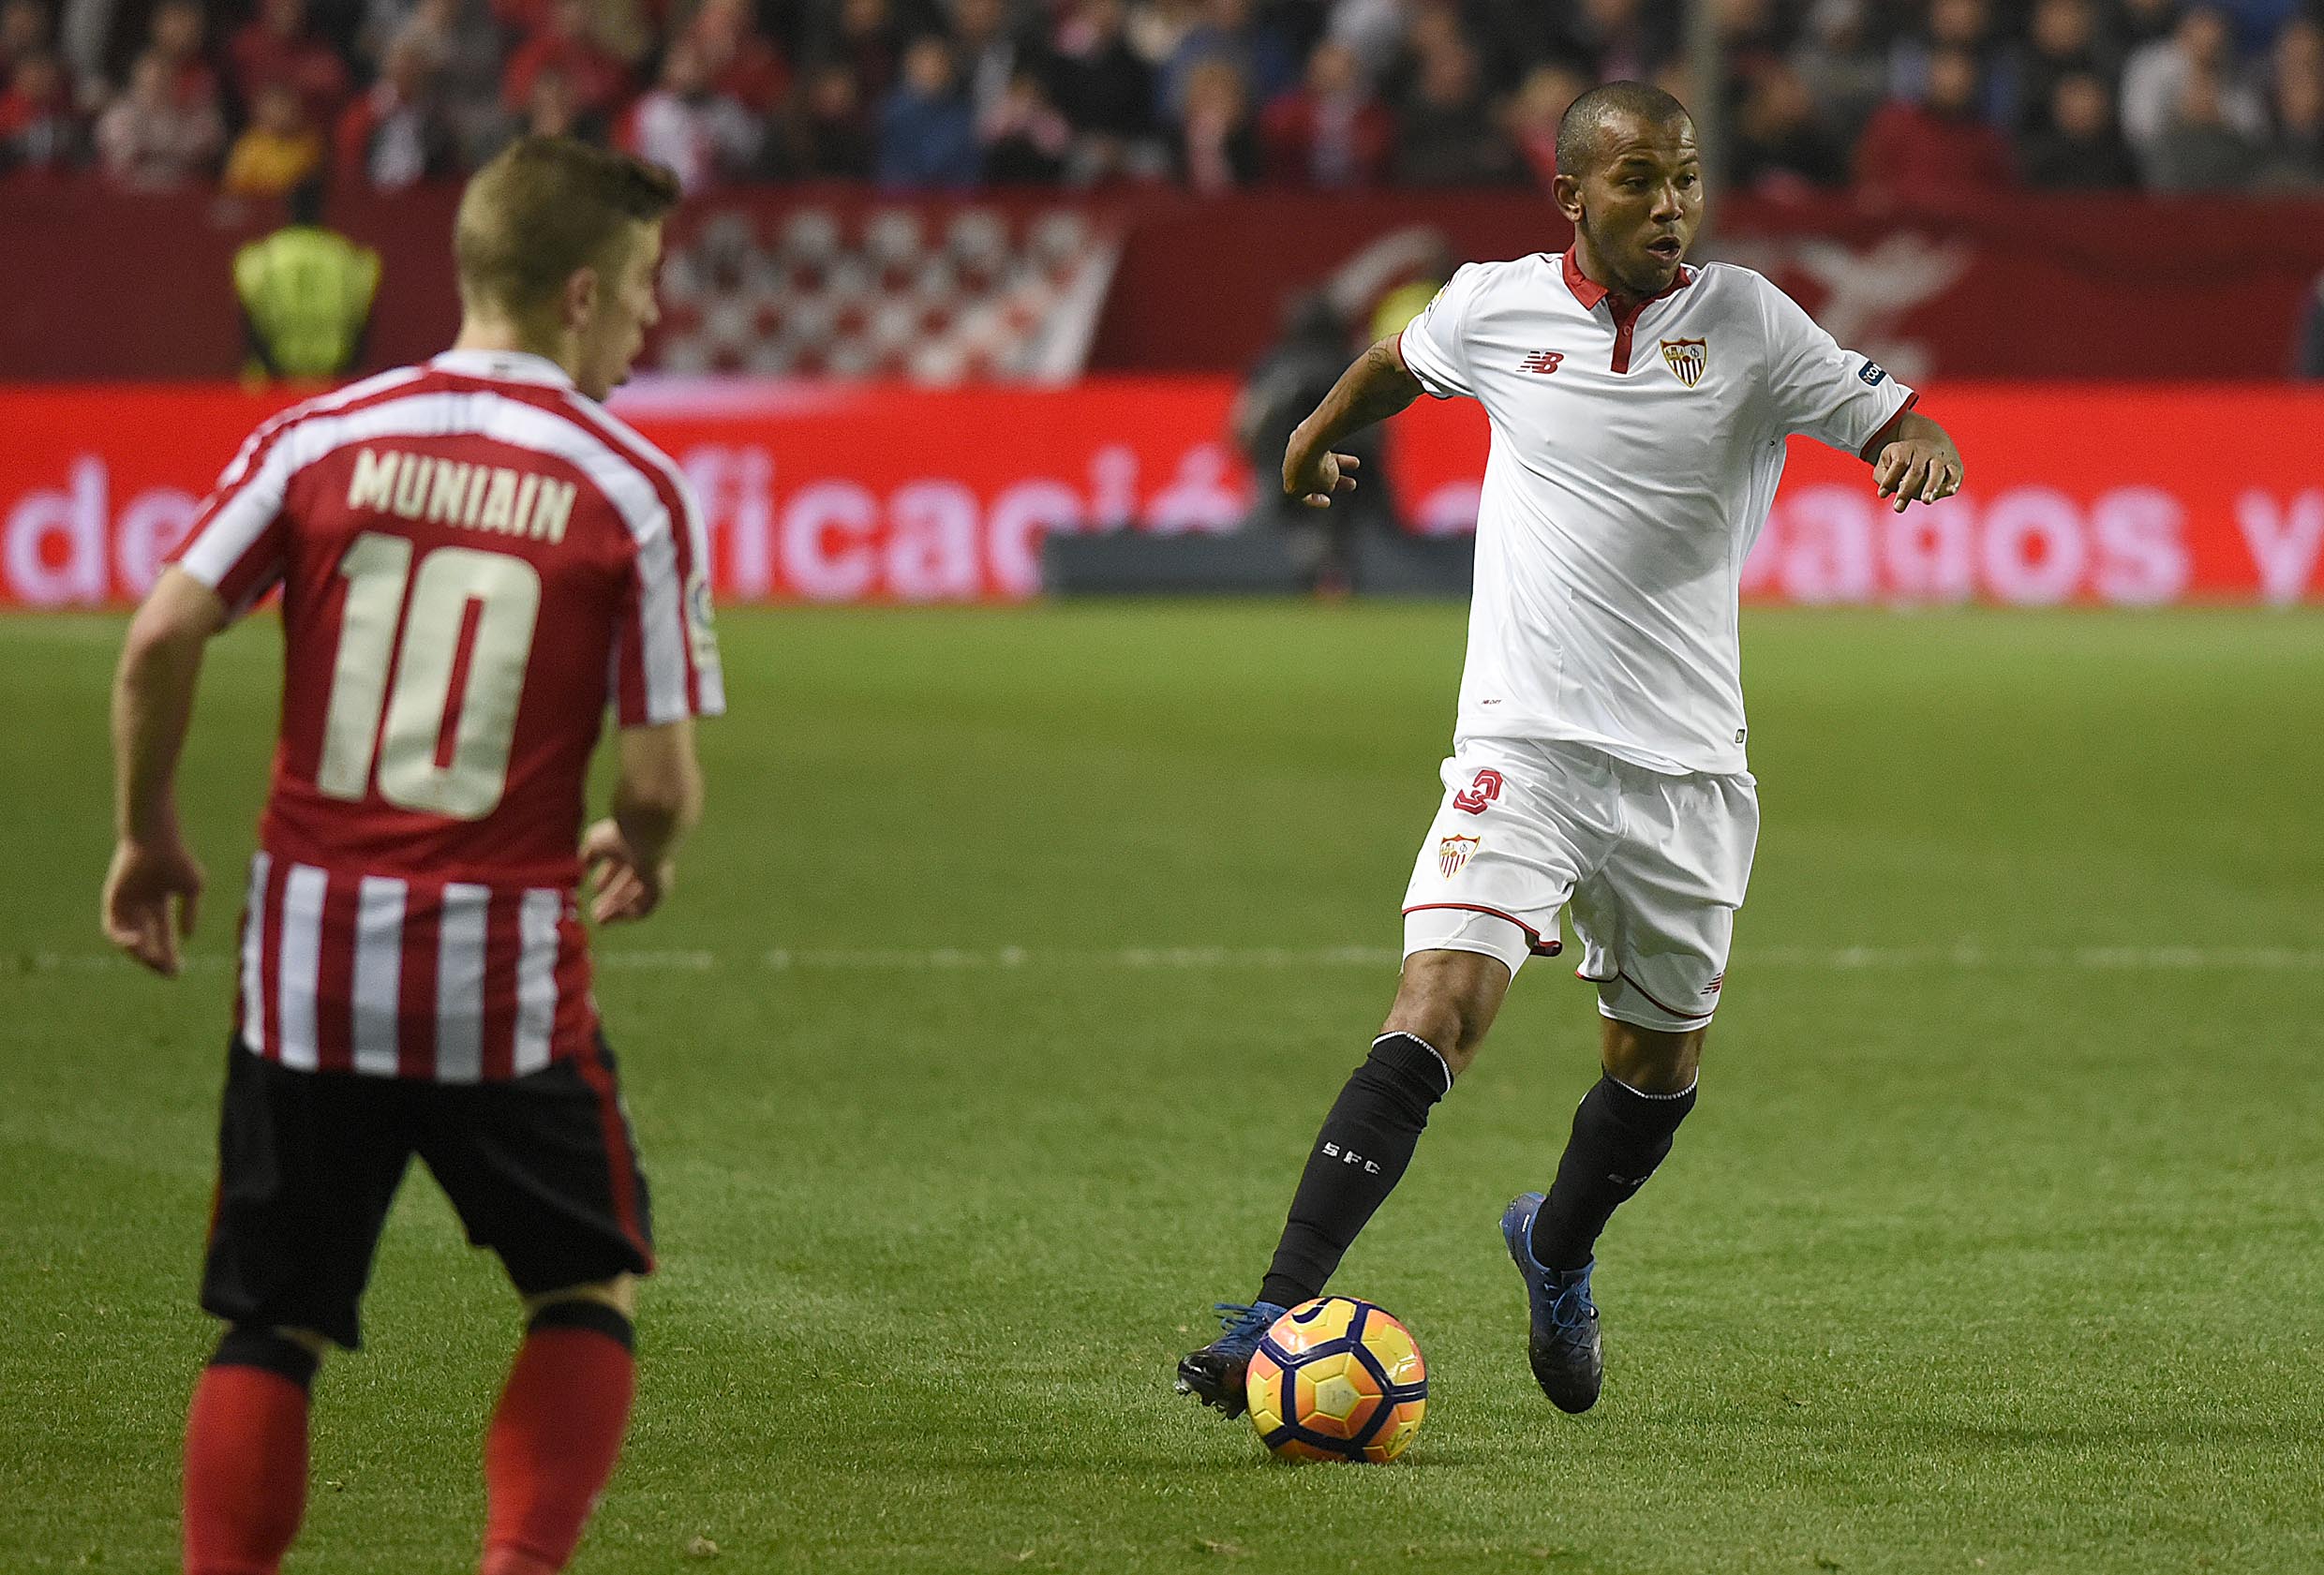 Mariano playing for Sevilla FC 